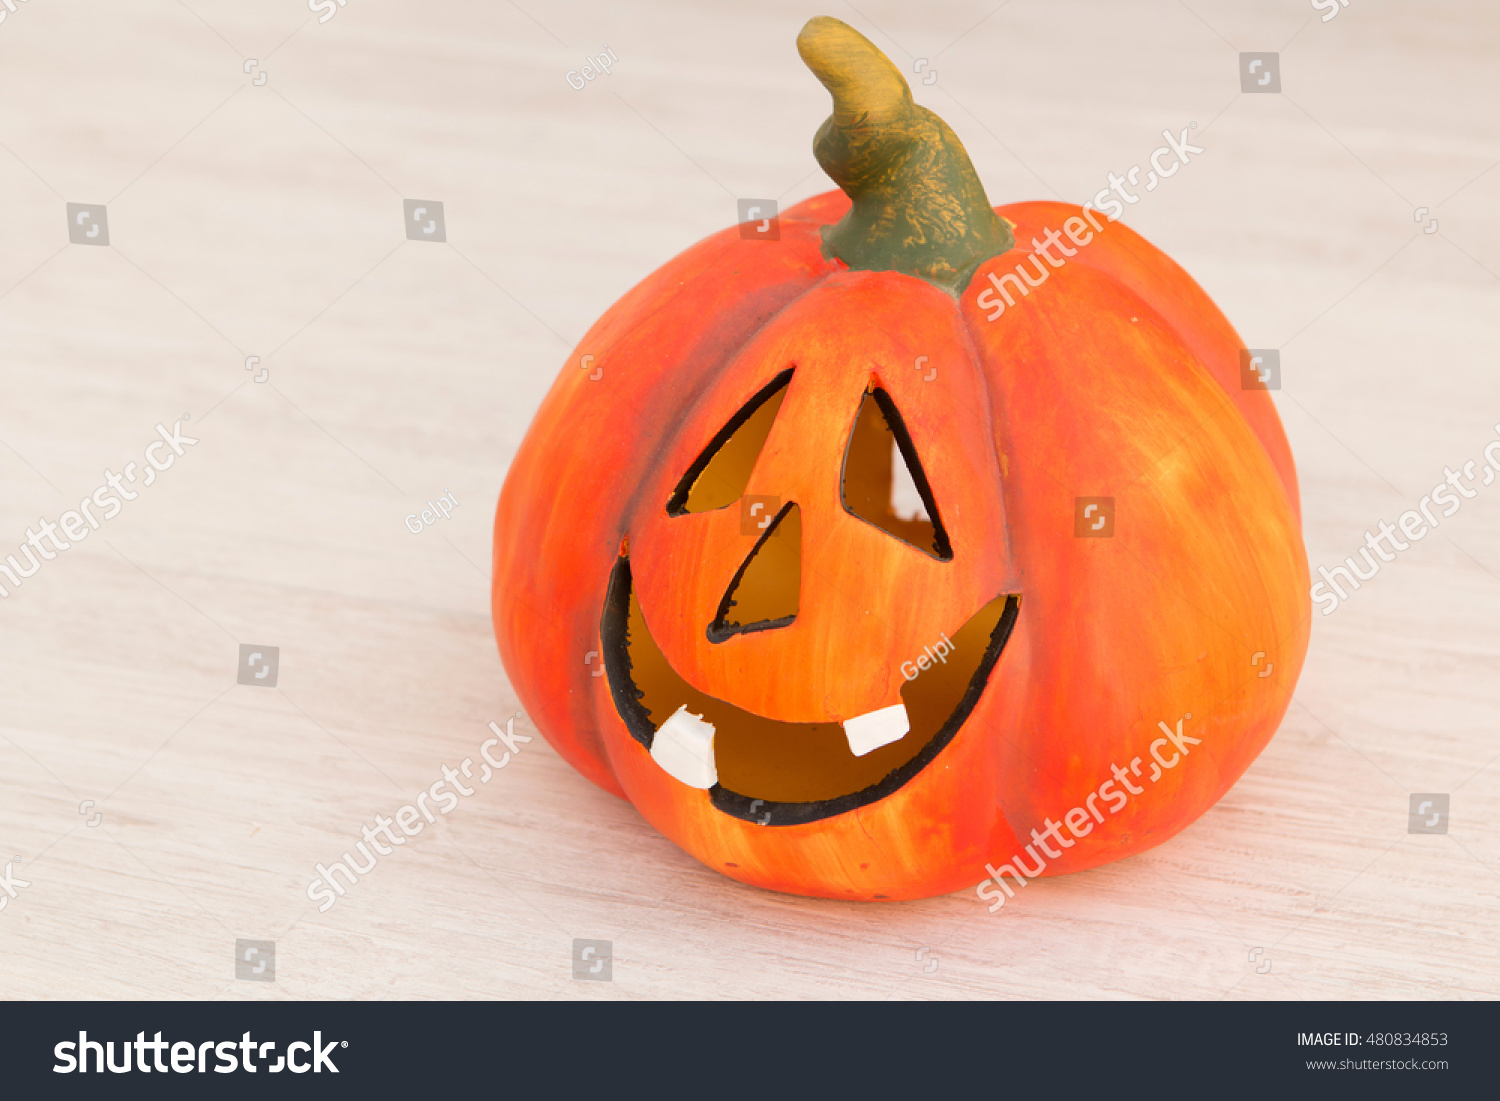 Orange pumpkin lantern with a spooky face smiling on a wooden grey background #480834853